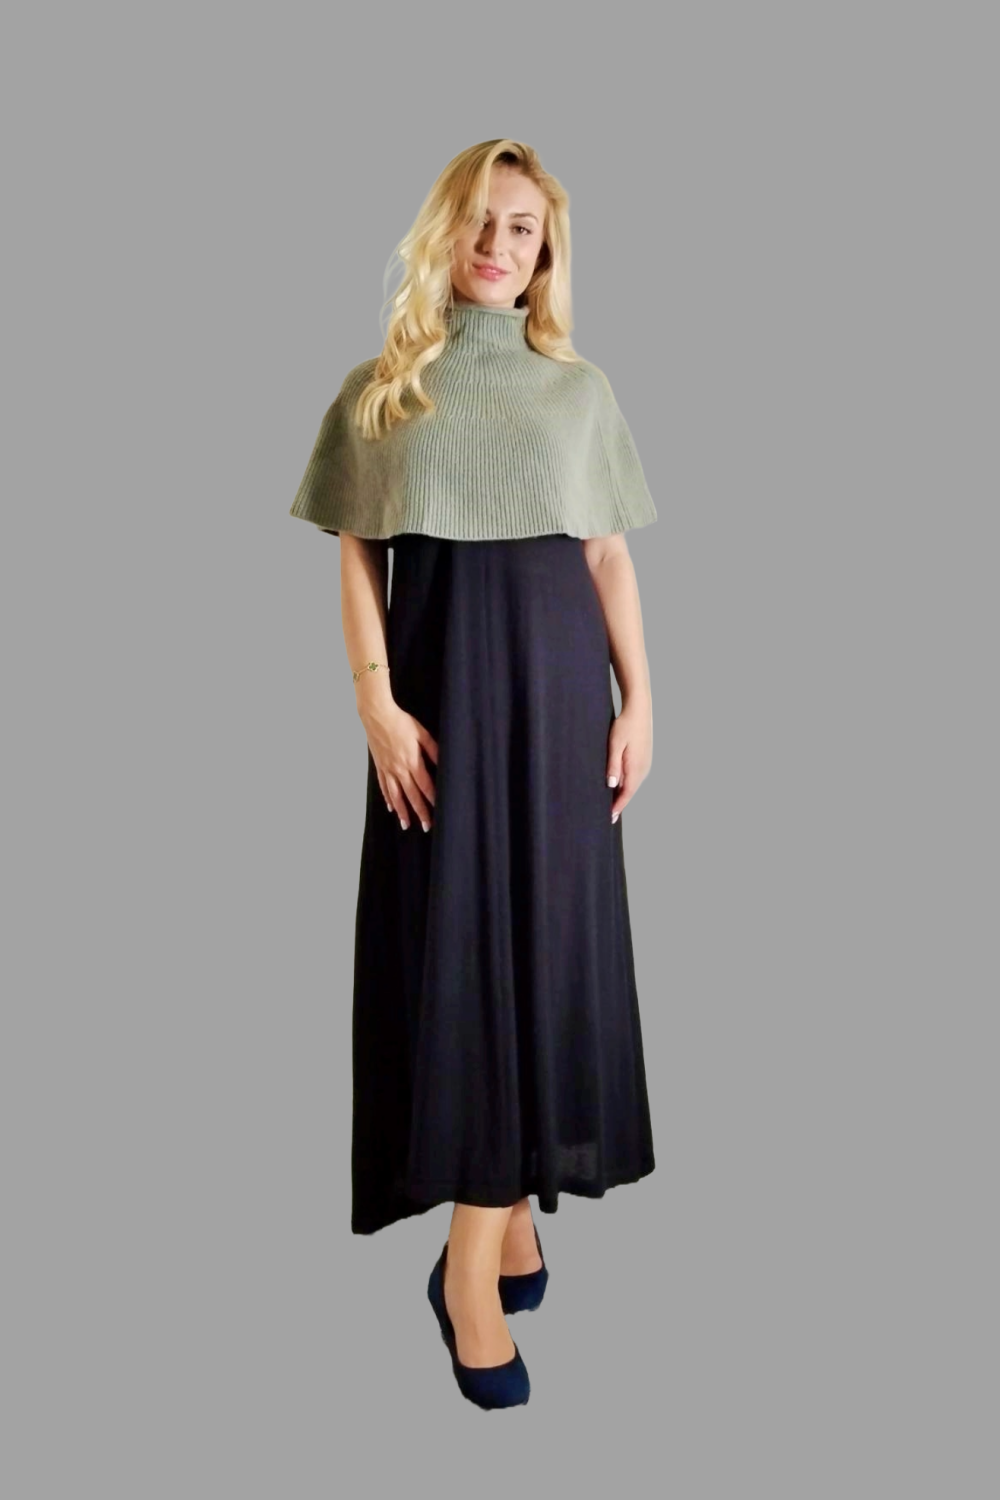 100% Cashmere Poncho in Pale Moss Green